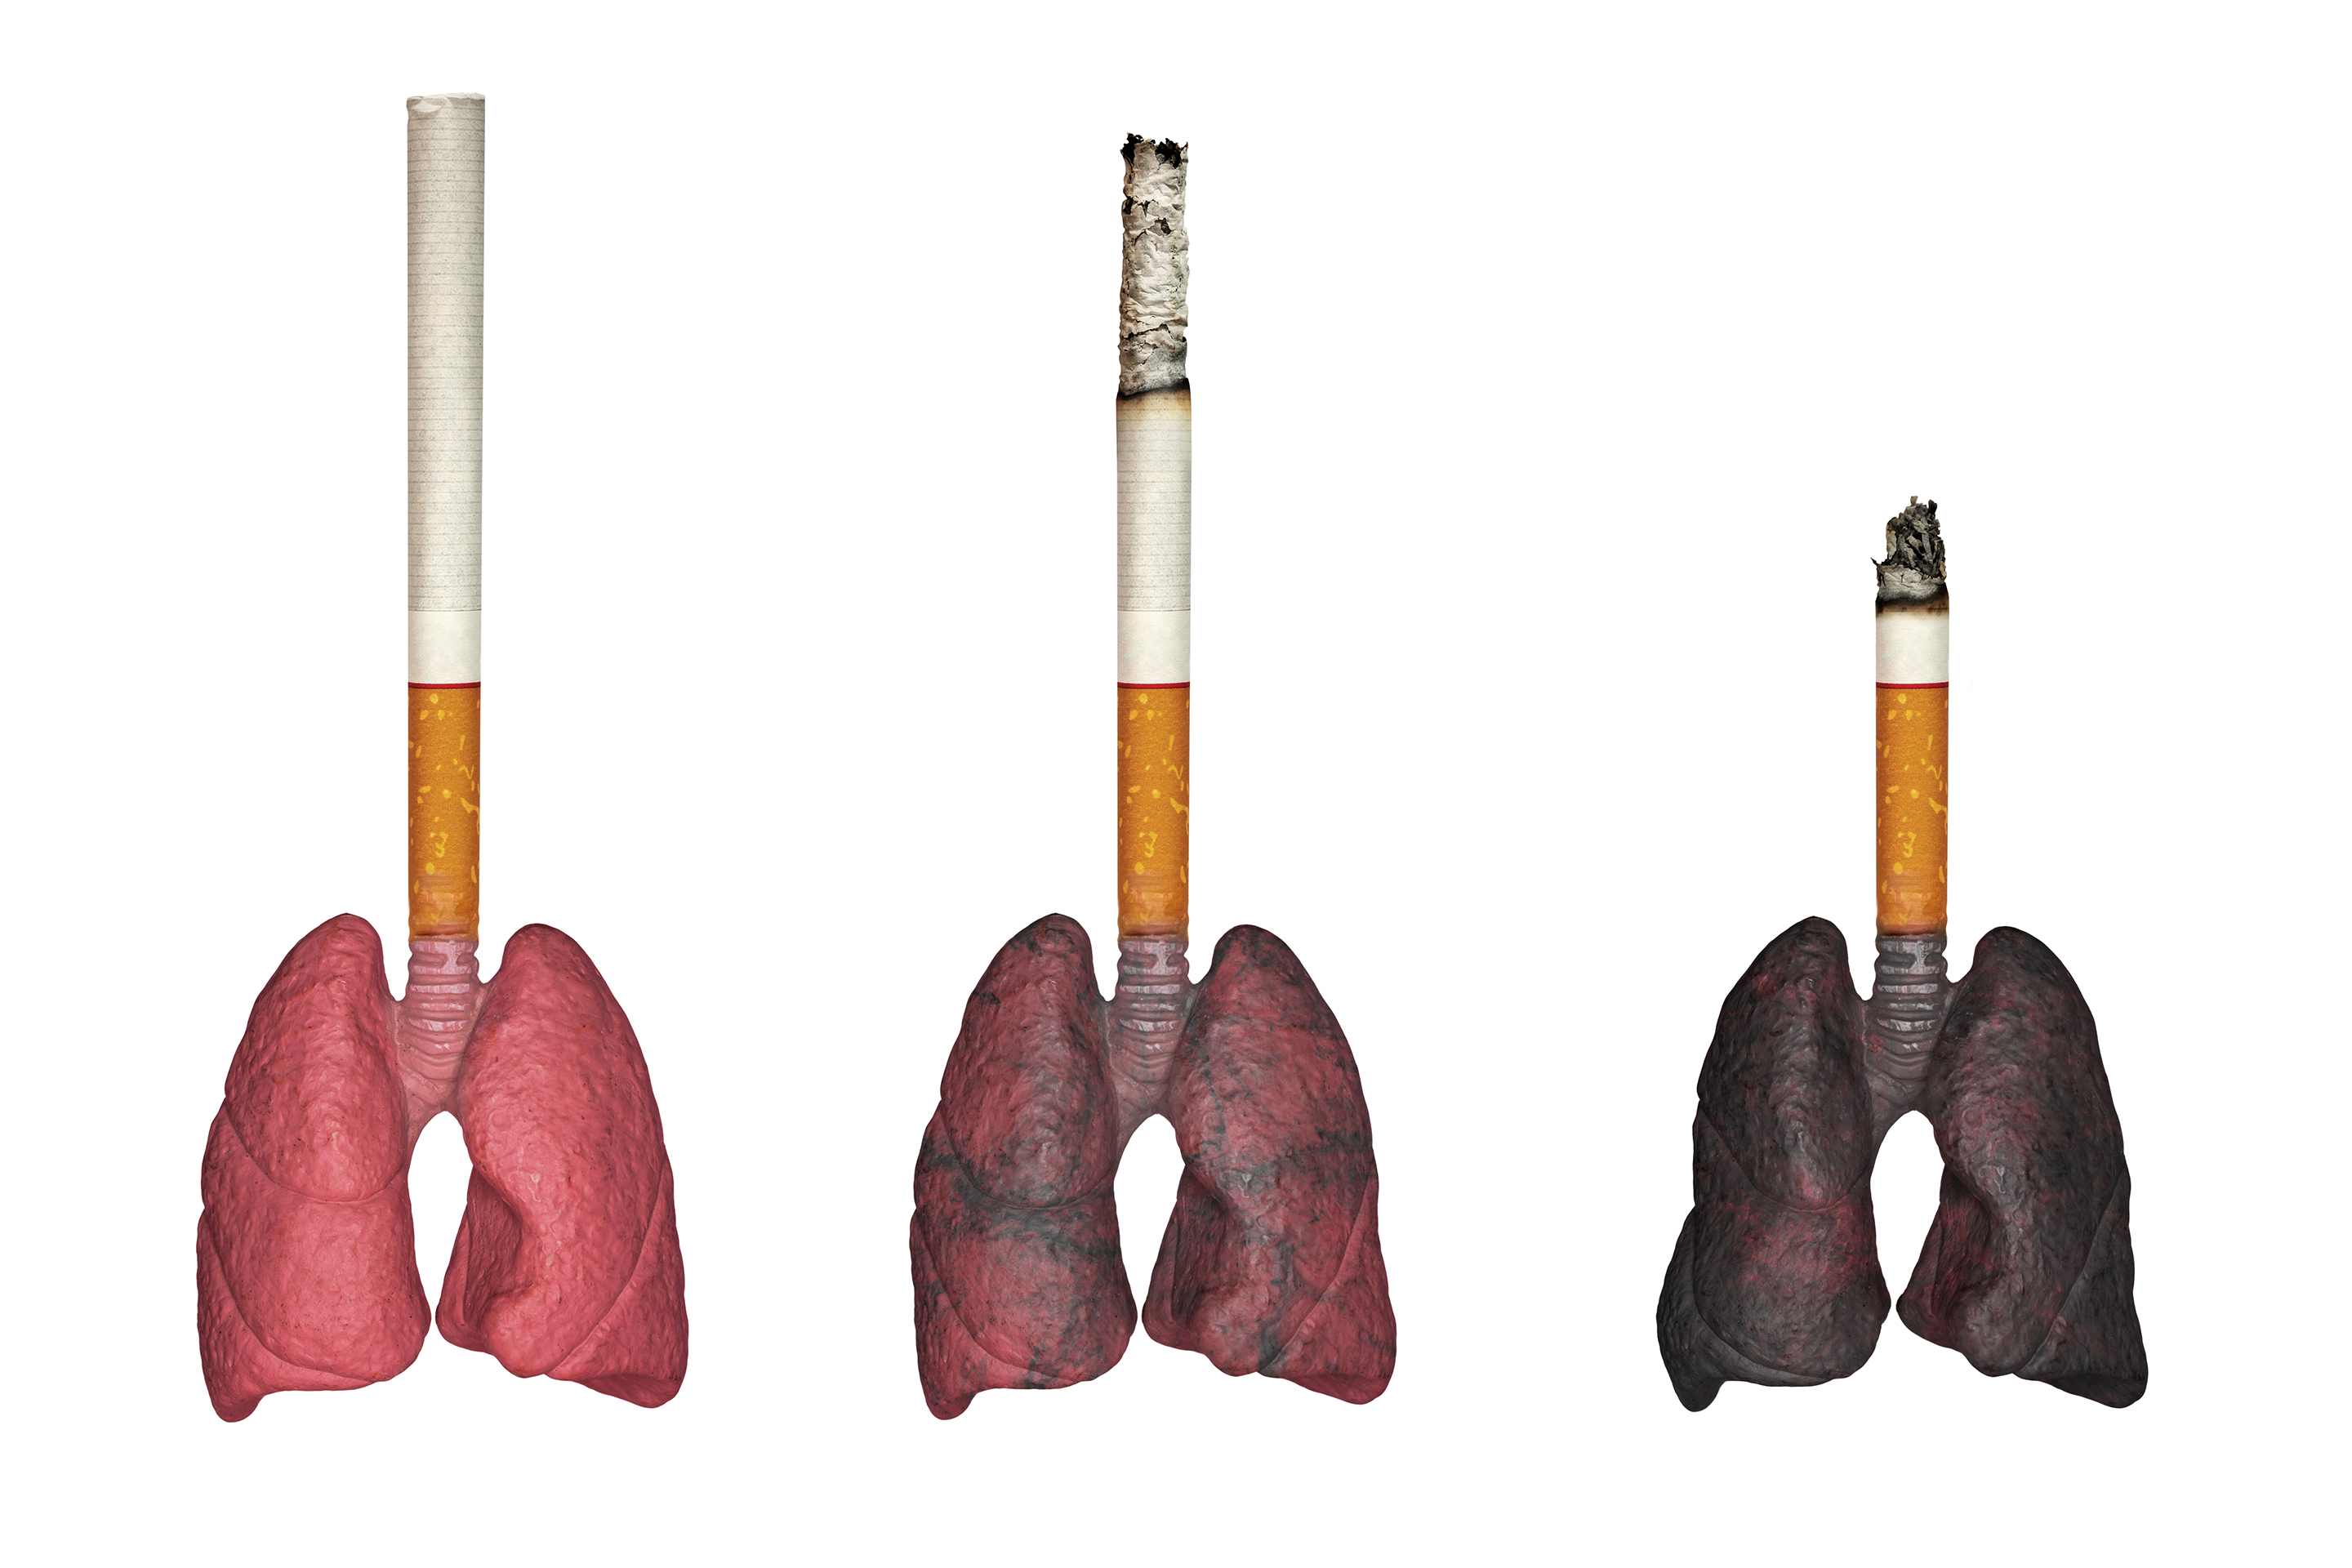 smokers lungs after quitting smoking